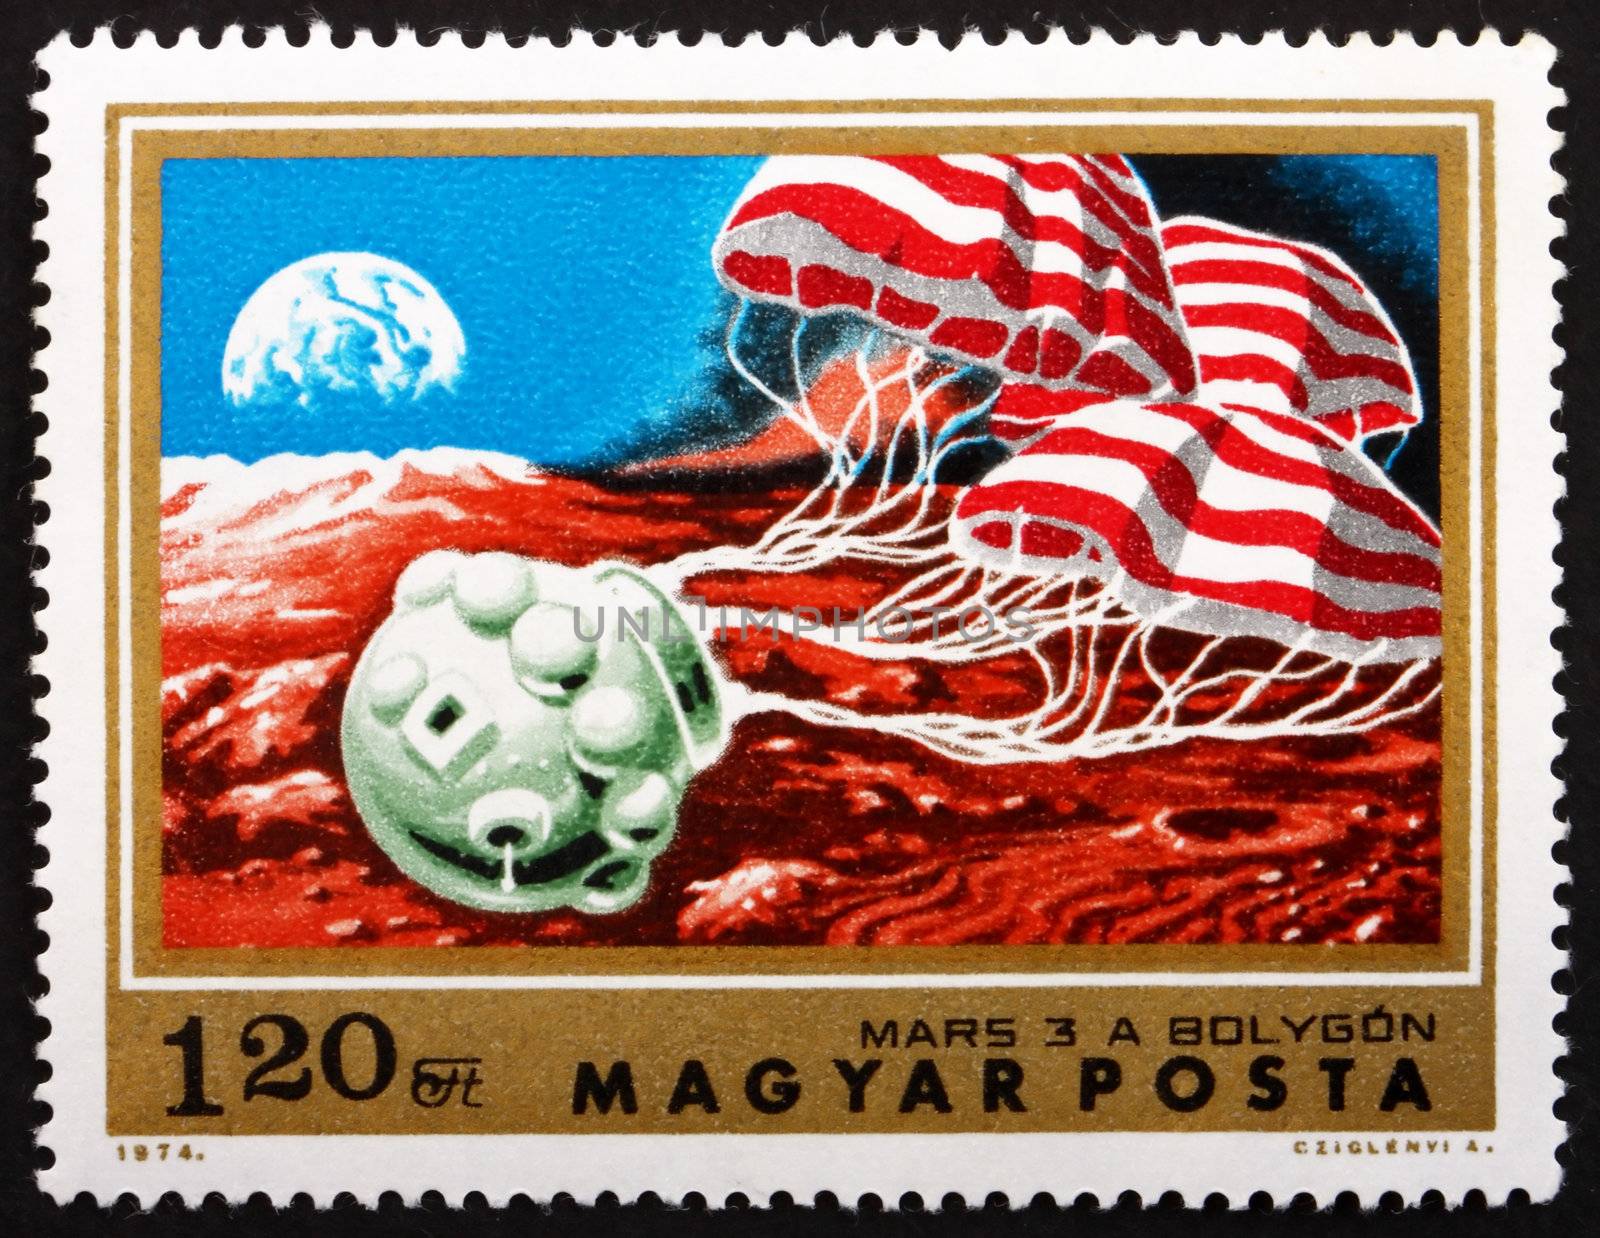 HUNGARY - CIRCA 1974: a stamp printed in the Hungary shows Soft Landing of Mars 3 on Mars, Soviet Unmanned Space Probe, circa 1974